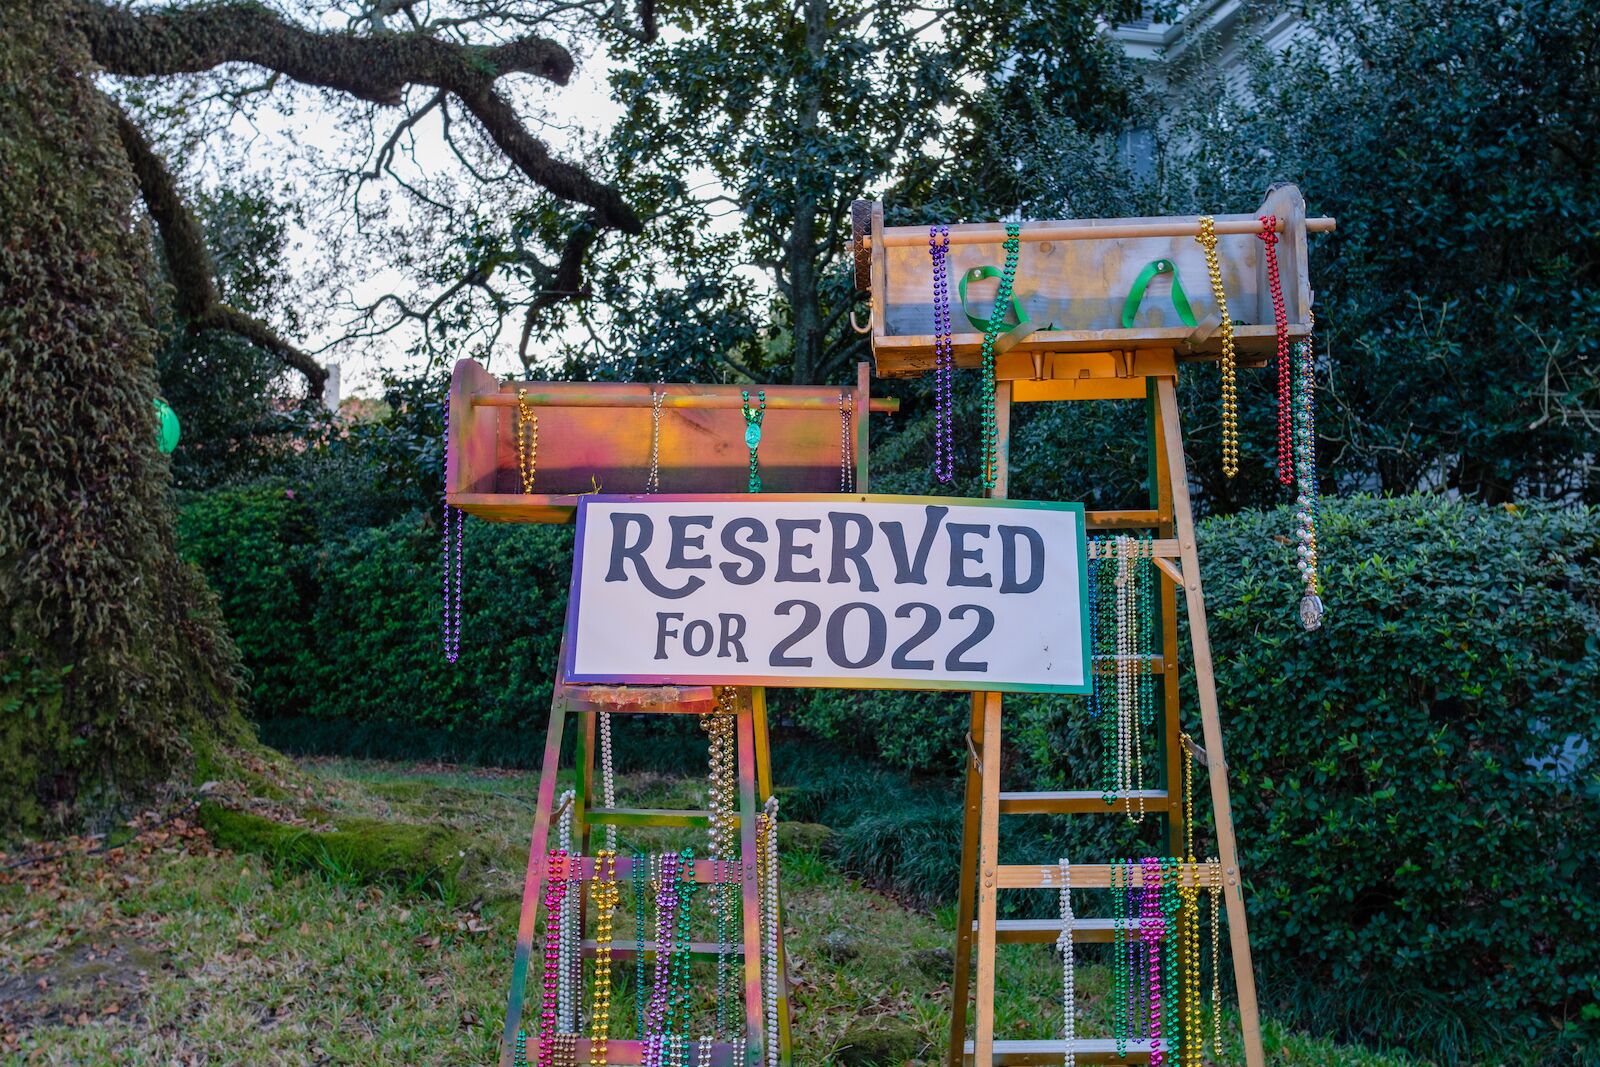 Seats reserved to see the parades in New Orleans for mardi Gras 2022